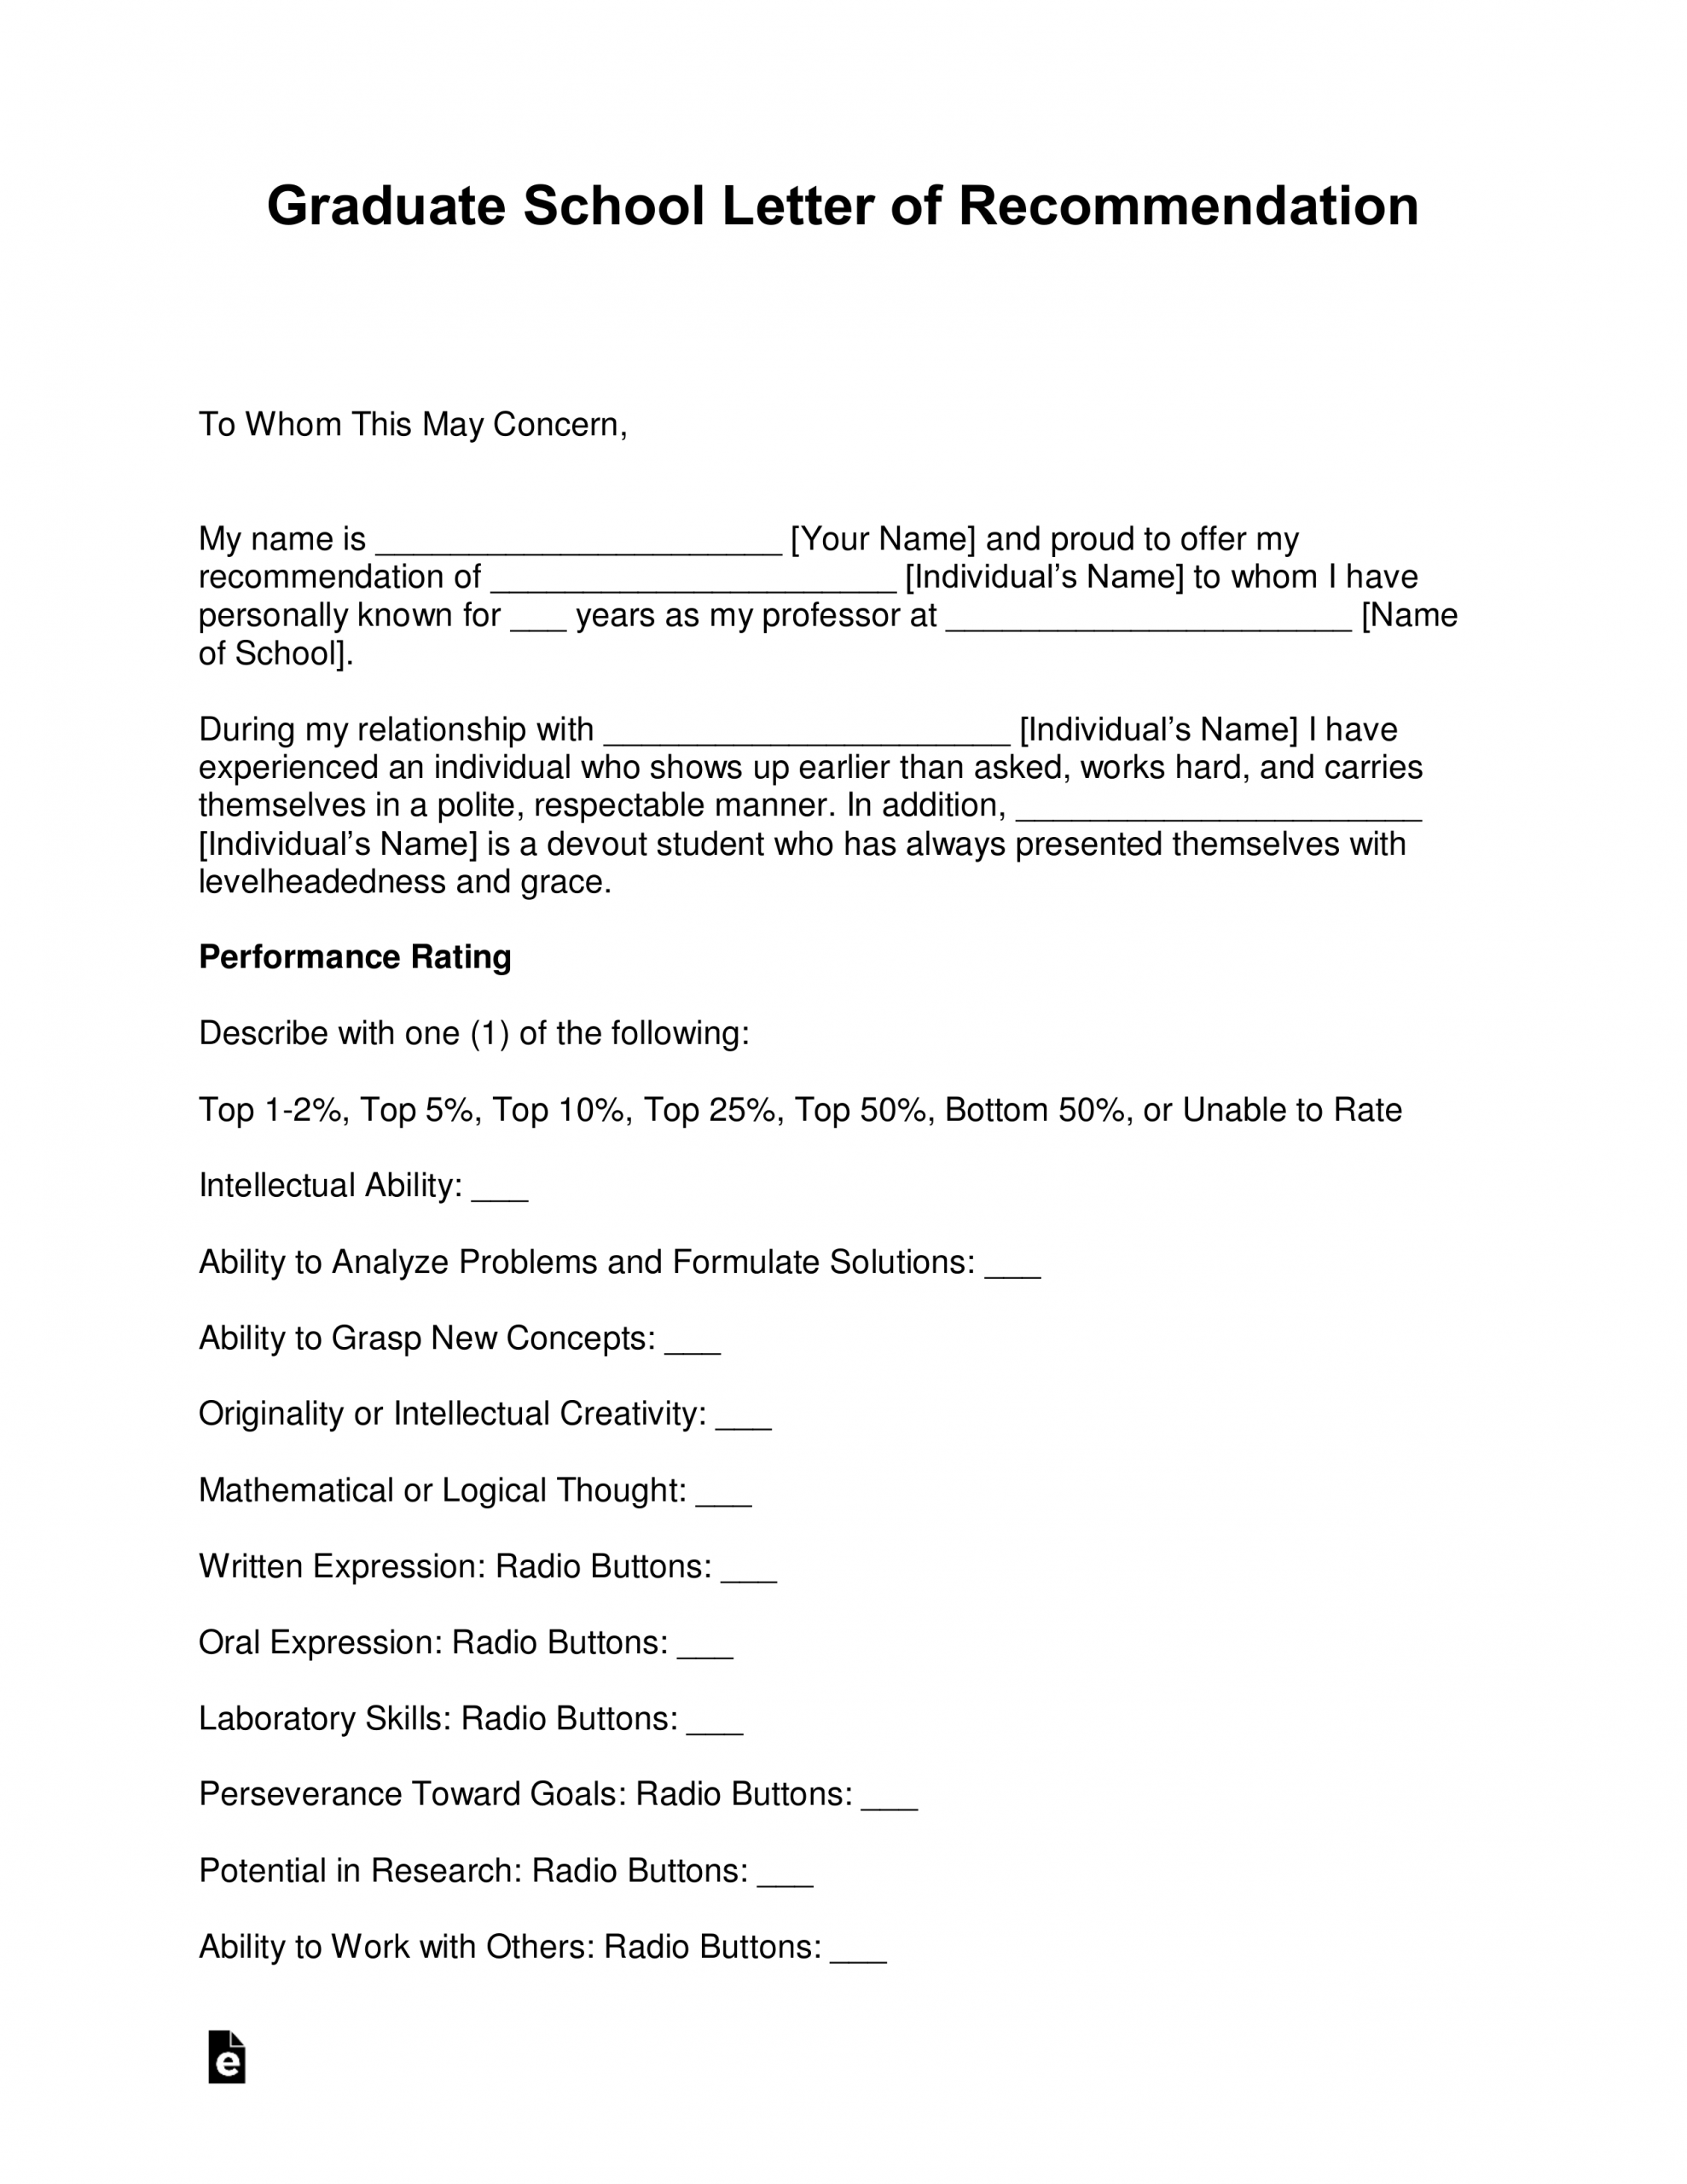 Free Graduate School Letter Of Recommendation Template with measurements 2550 X 3301